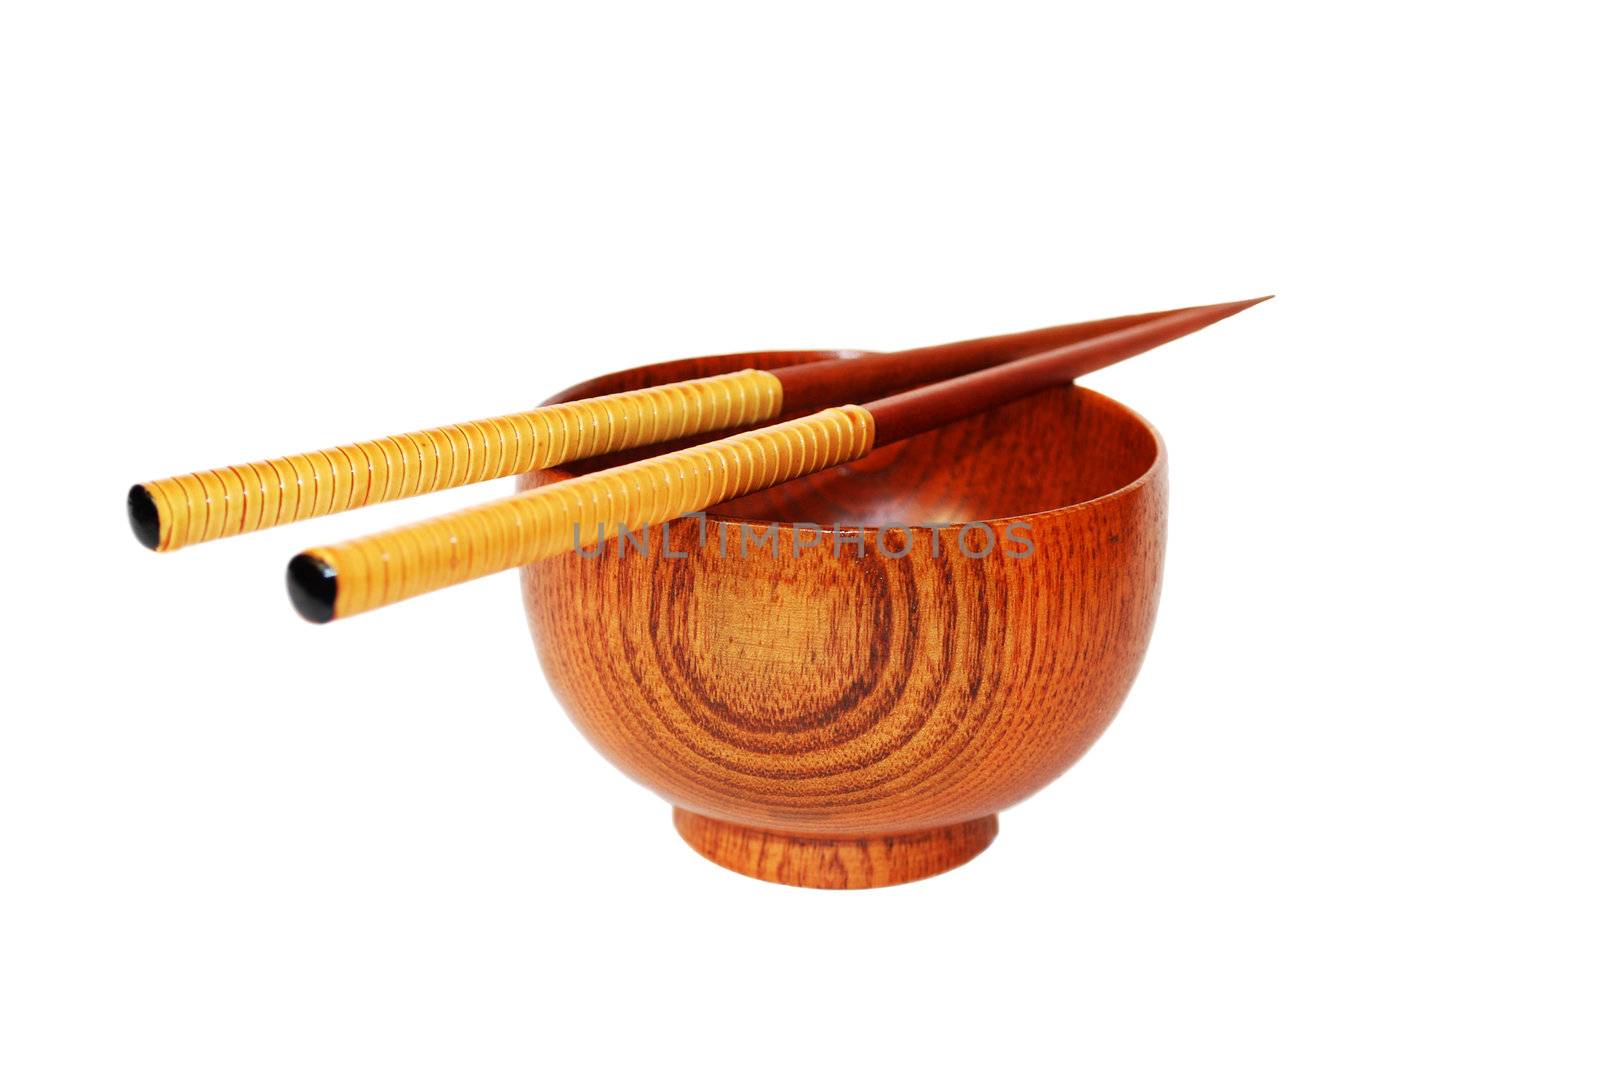 Chopsticks with wooden bowl isolated on white 